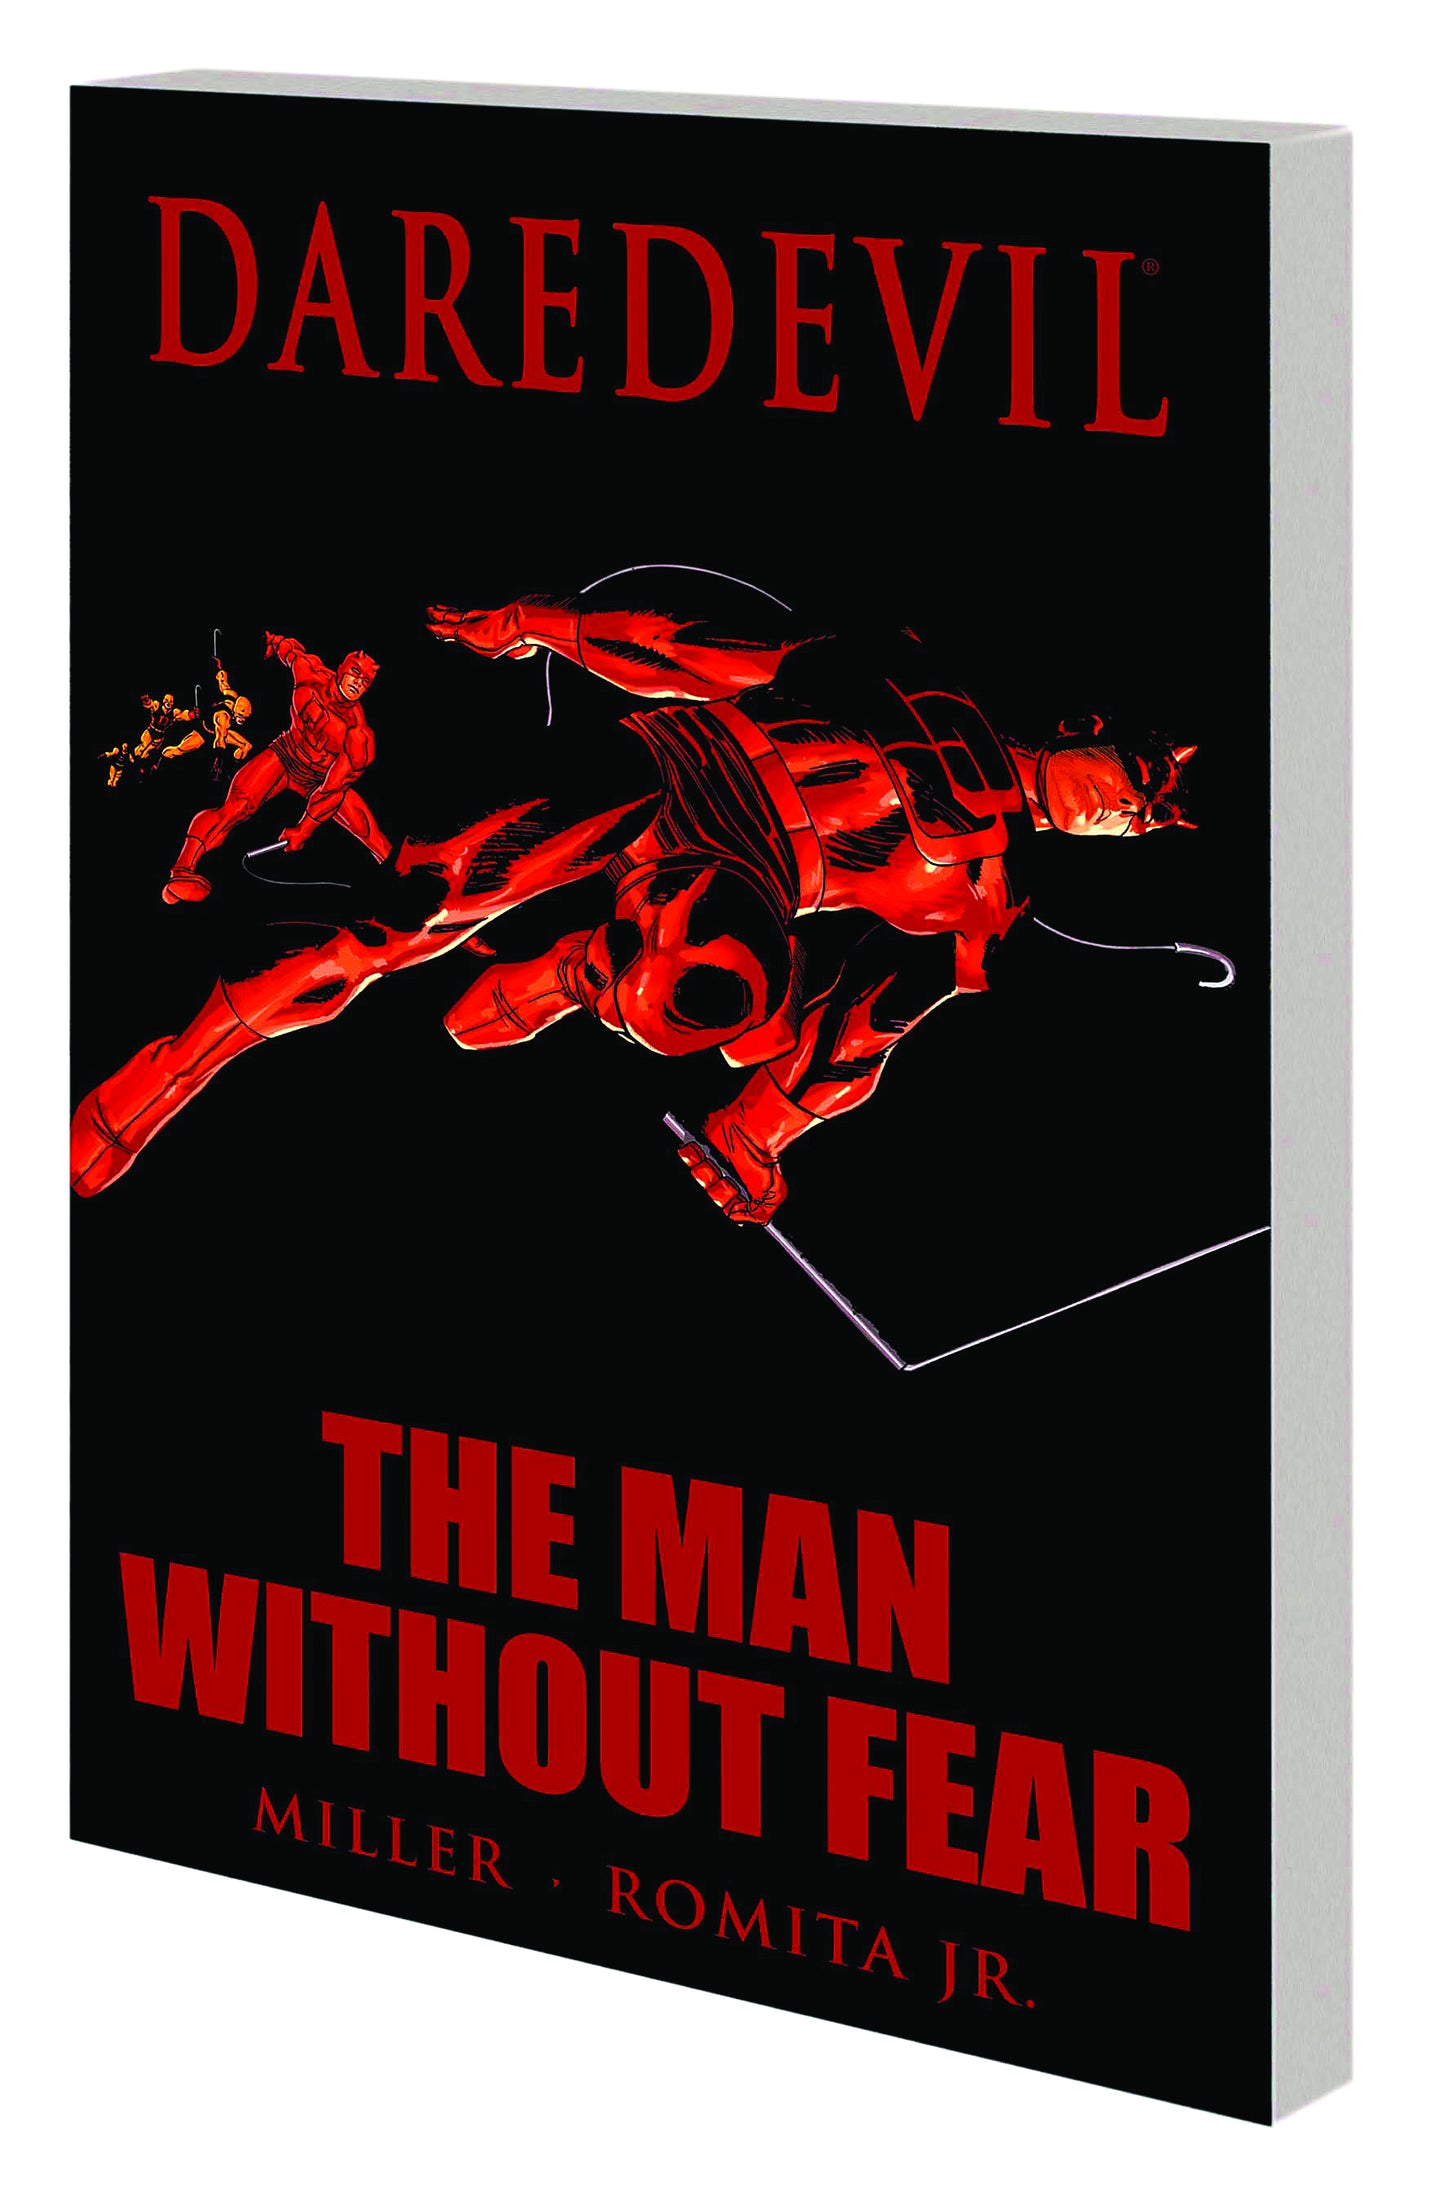 DAREDEVIL TP MAN WITHOUT FEAR